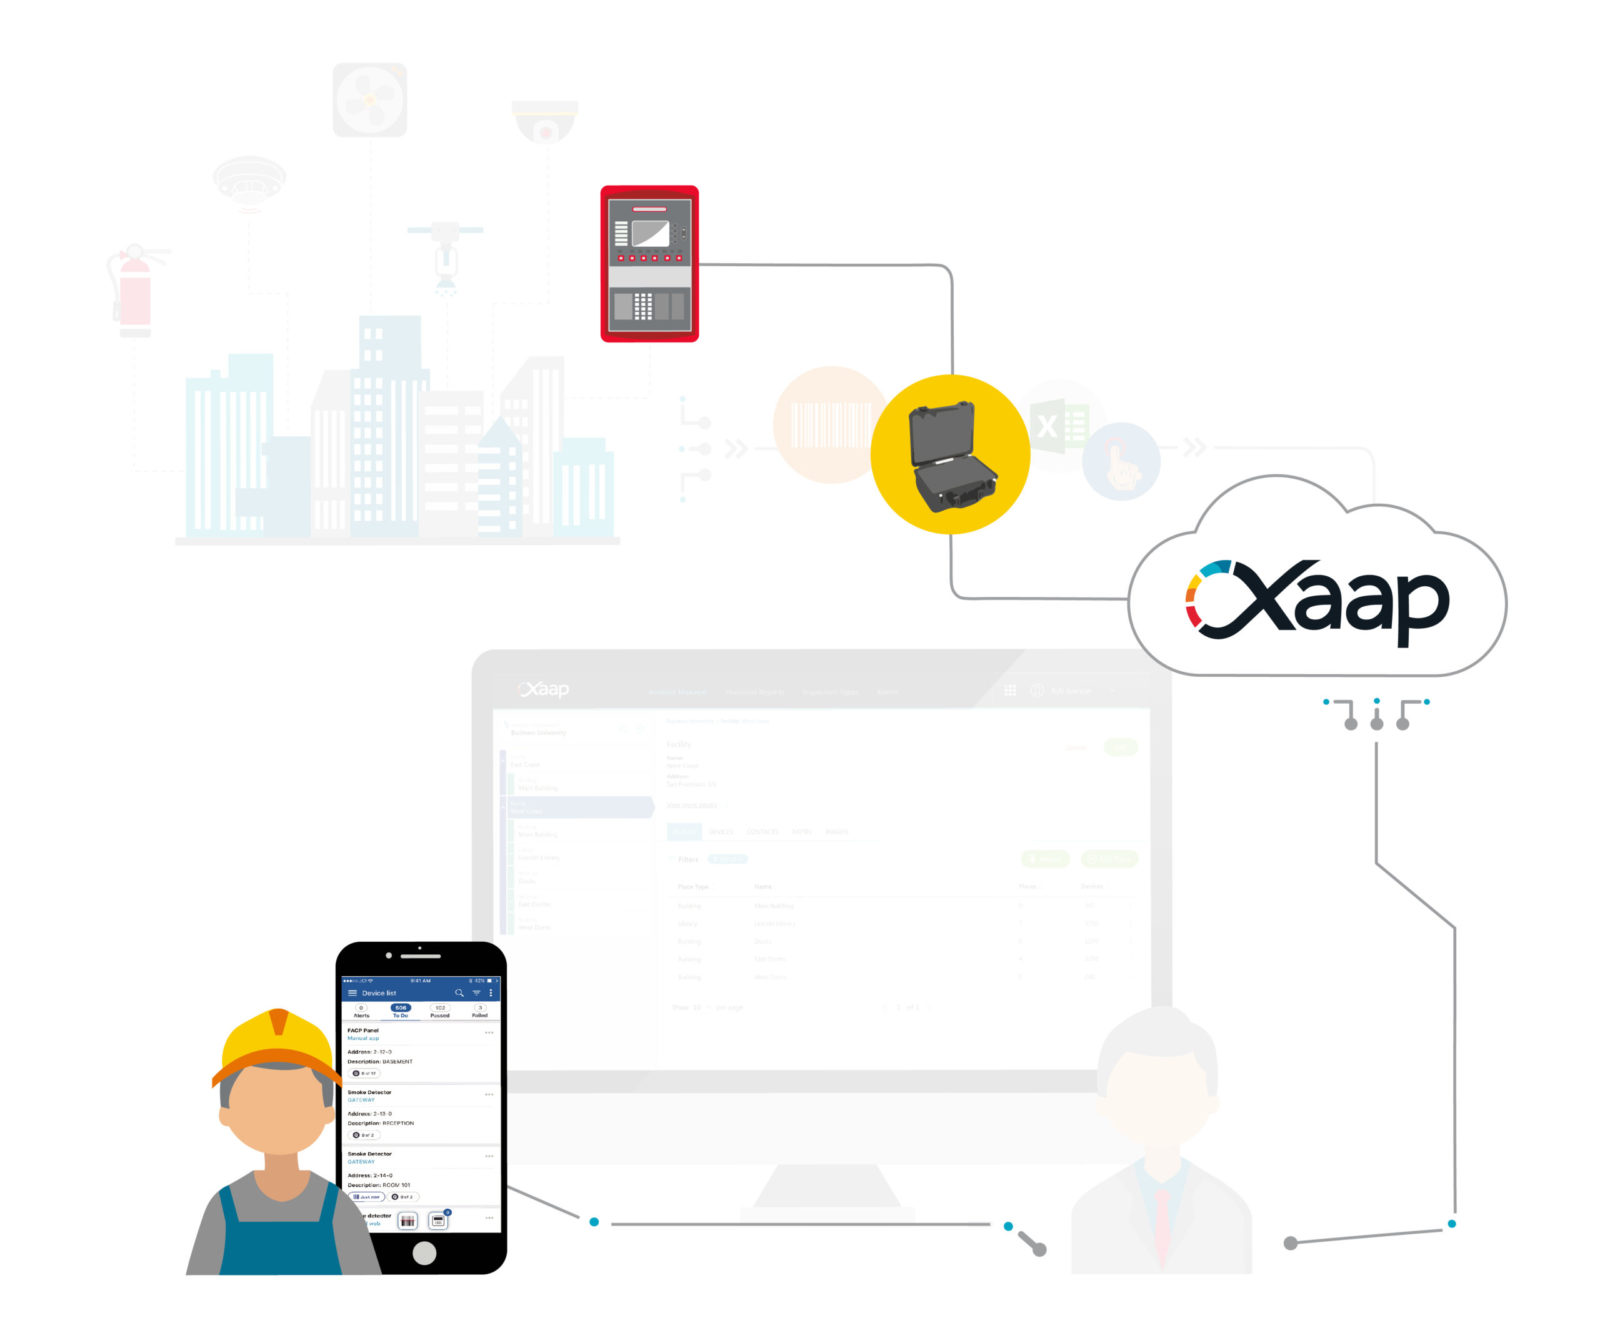 How Xaap works - add on